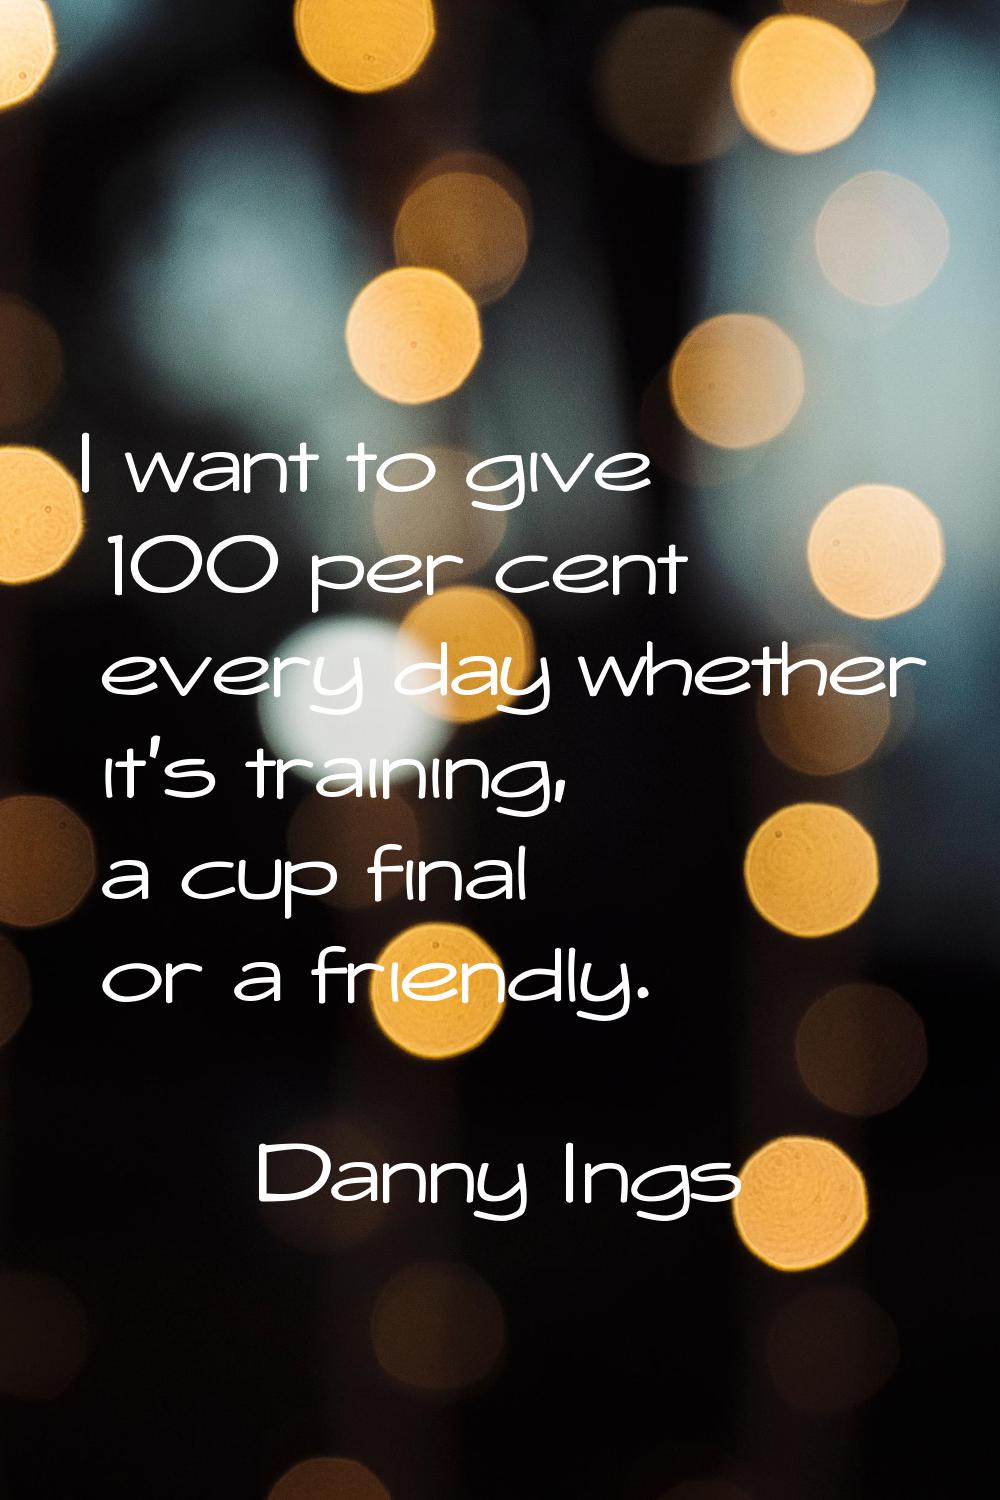 I want to give 100 per cent every day whether it's training, a cup final or a friendly.